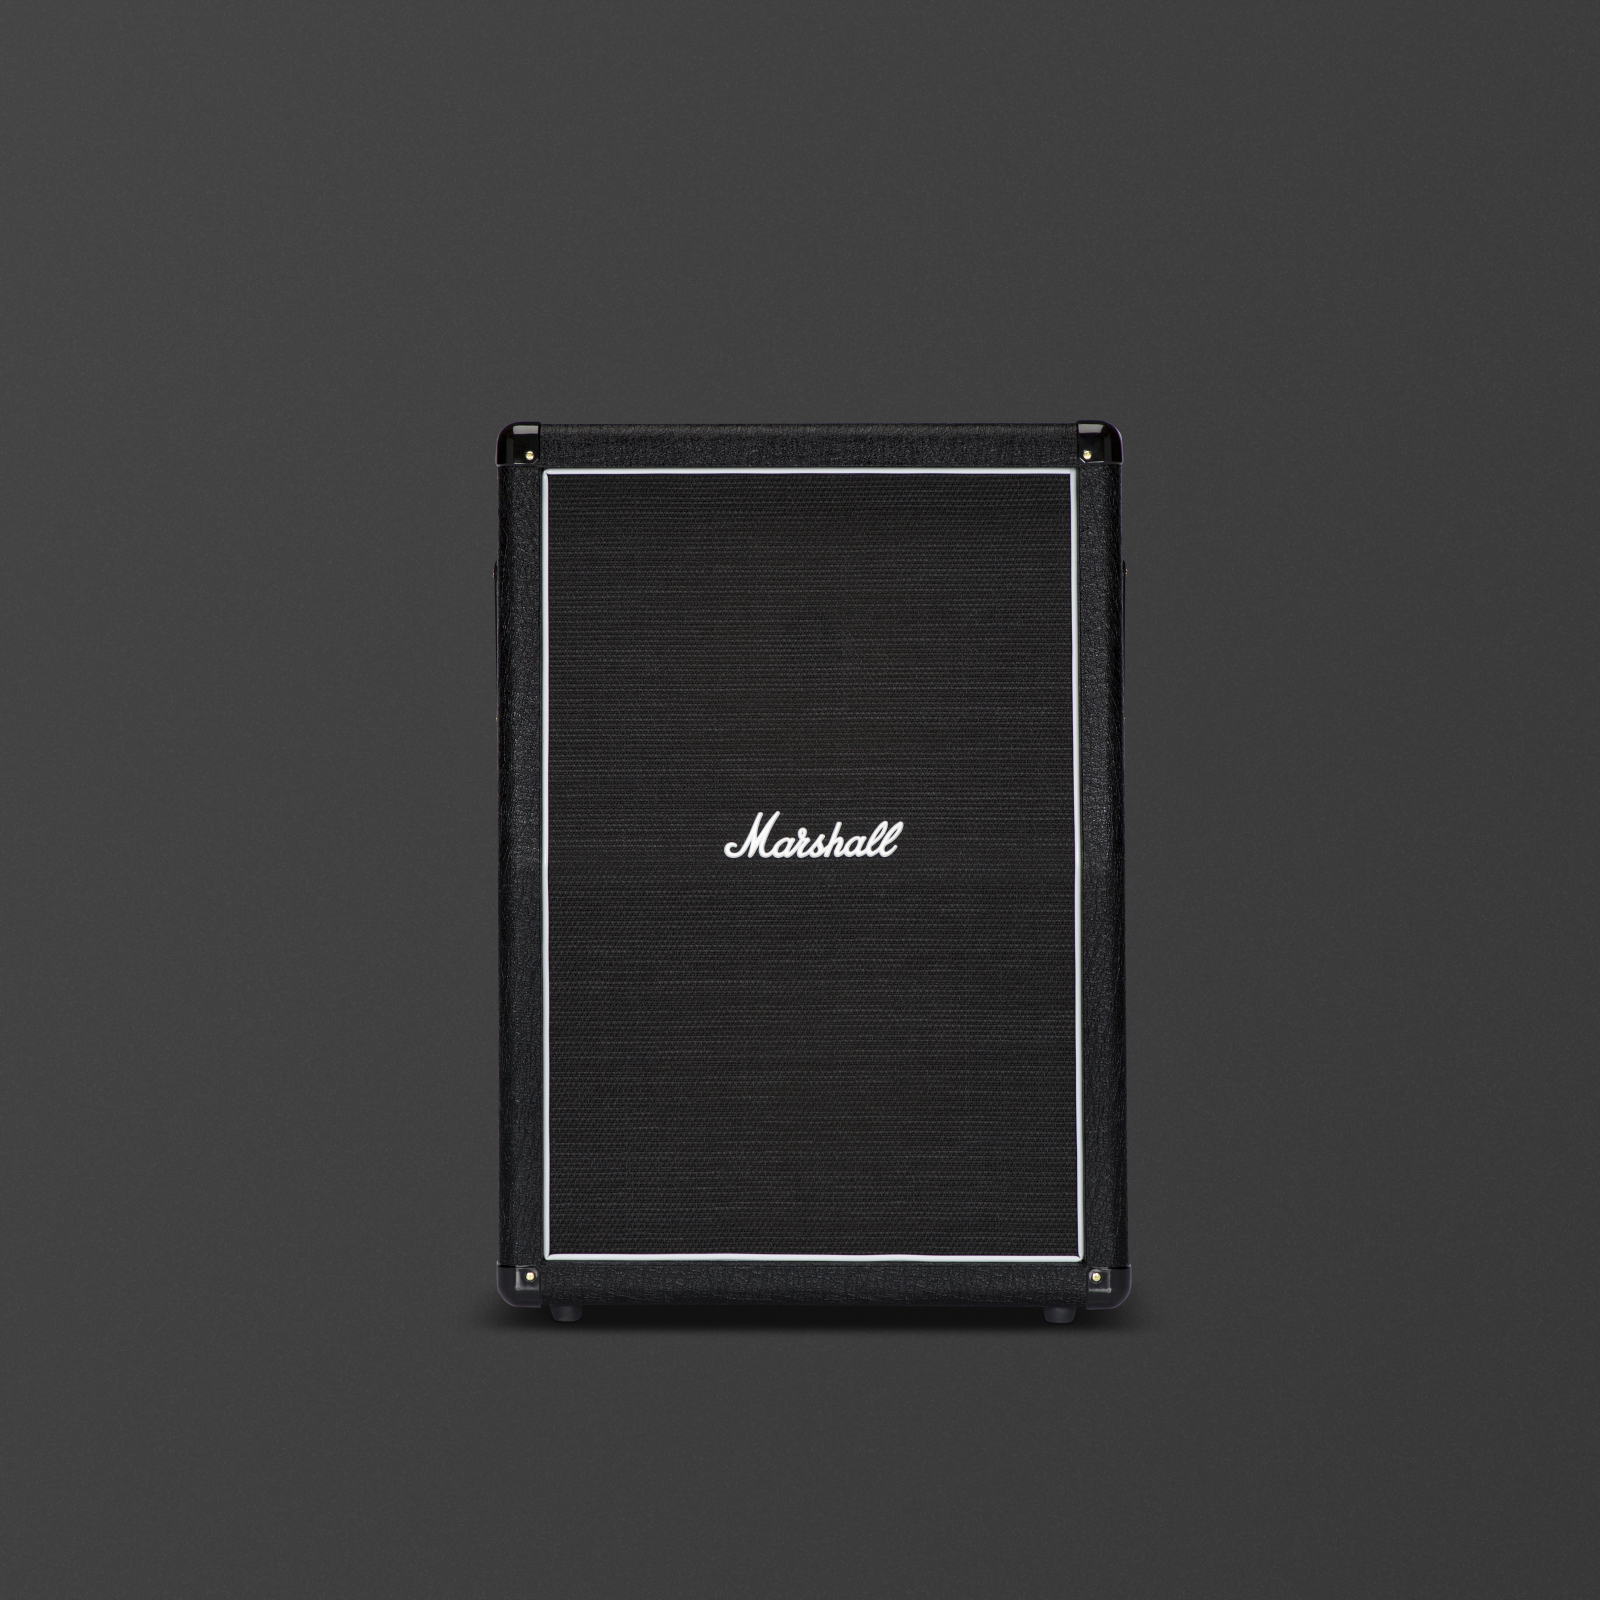 A black Marshall MX 2x12 Angled Cabinet seen from the front